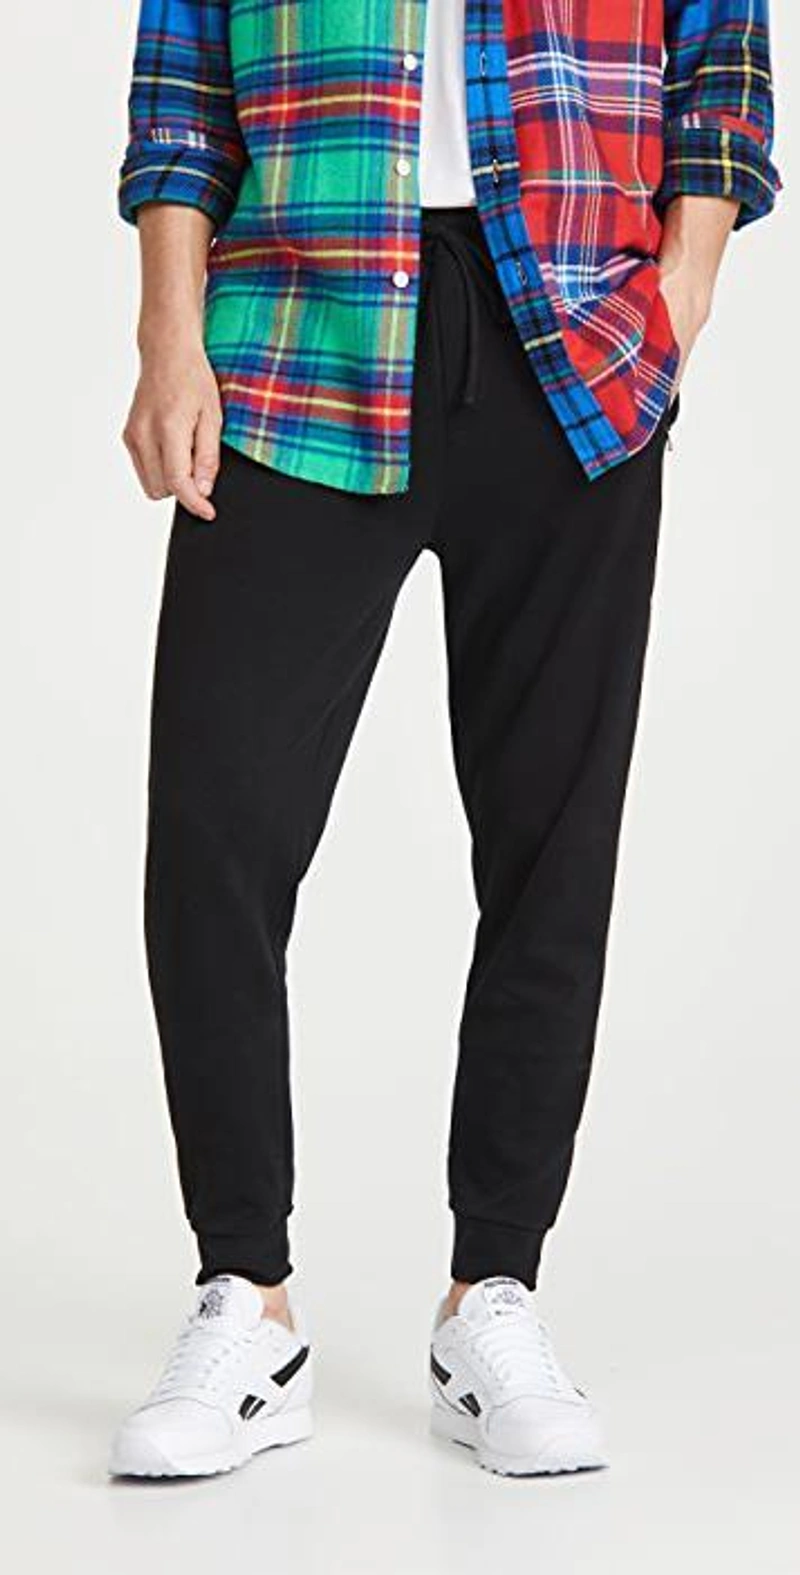 shopbop.com's Posts | 搭配: Reigning Champ T-shirt 2 Pack In Heather Grey；Polo Ralph Lauren Lux Jersey Double Knit Pants In Black；Polo Ralph Lauren Classic Fit Plaid Twill Fun Shirt In Multi Funshirt